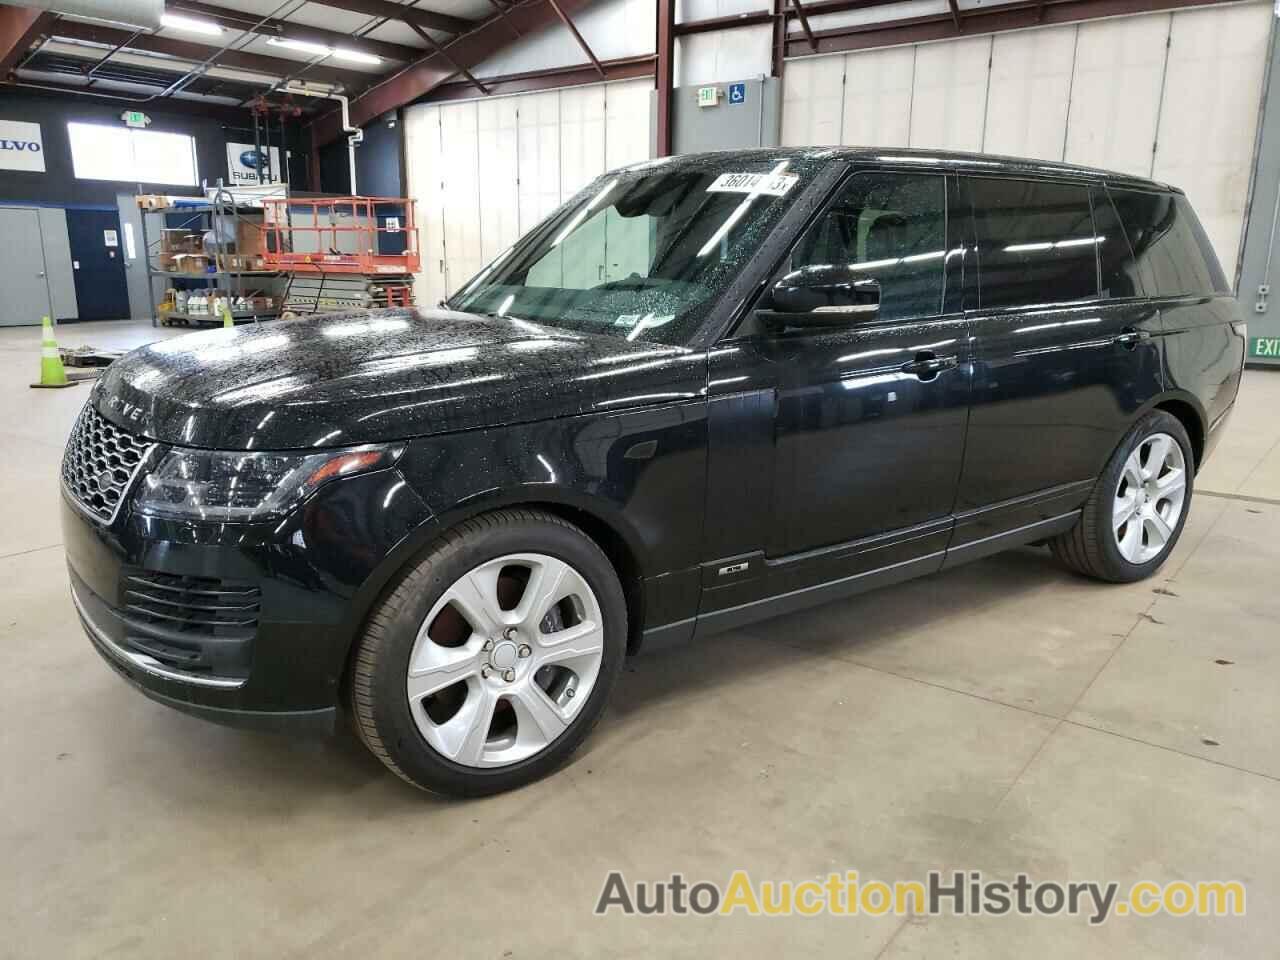 2018 LAND ROVER RANGEROVER SUPERCHARGED, SALGS5REXJA394163